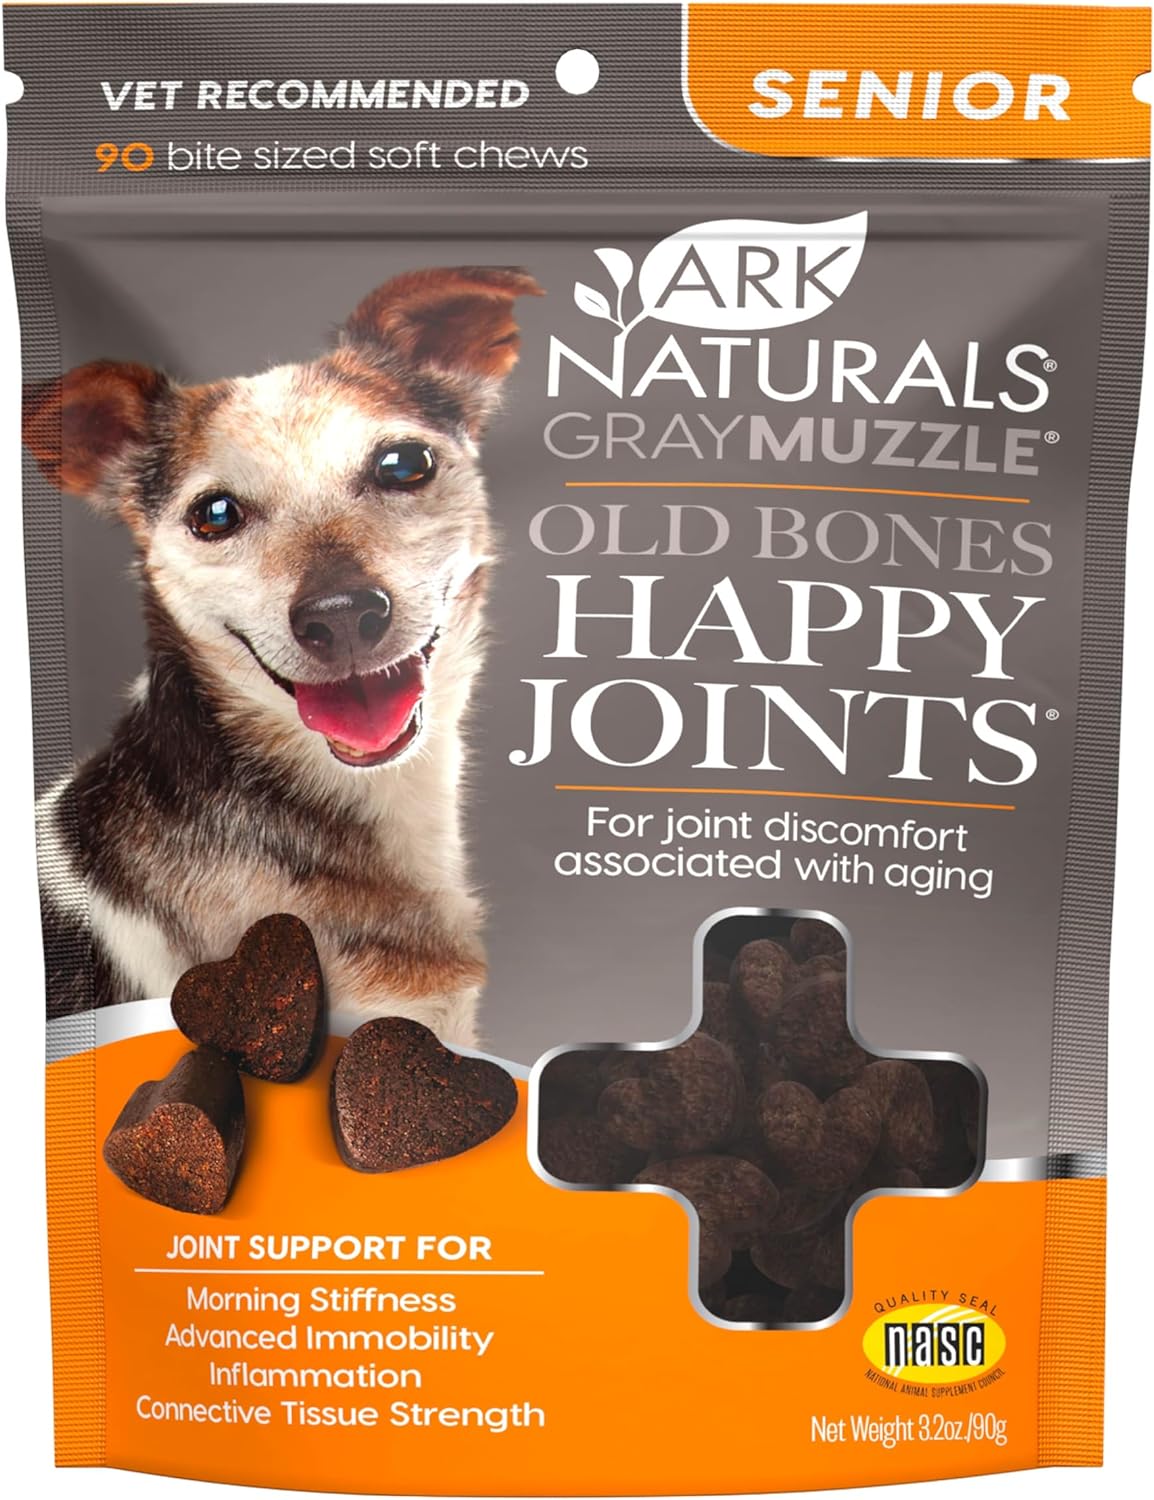 ARK NATURALS Gray Muzzle Old Dogs! Happy Joints! Vet Recommended to Support Cartilage and Joint Function, Glucosamine, 90 Soft Chews,Orange